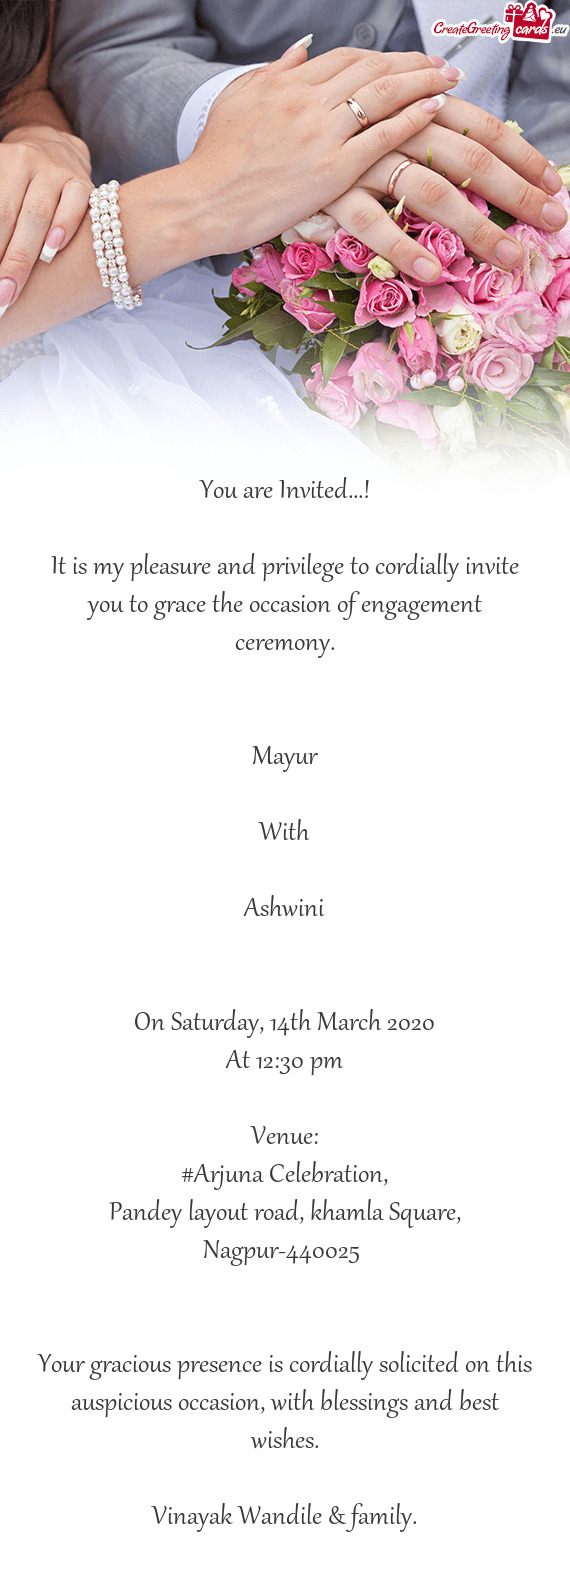 It is my pleasure and privilege to cordially invite you to grace the occasion of engagement ceremony